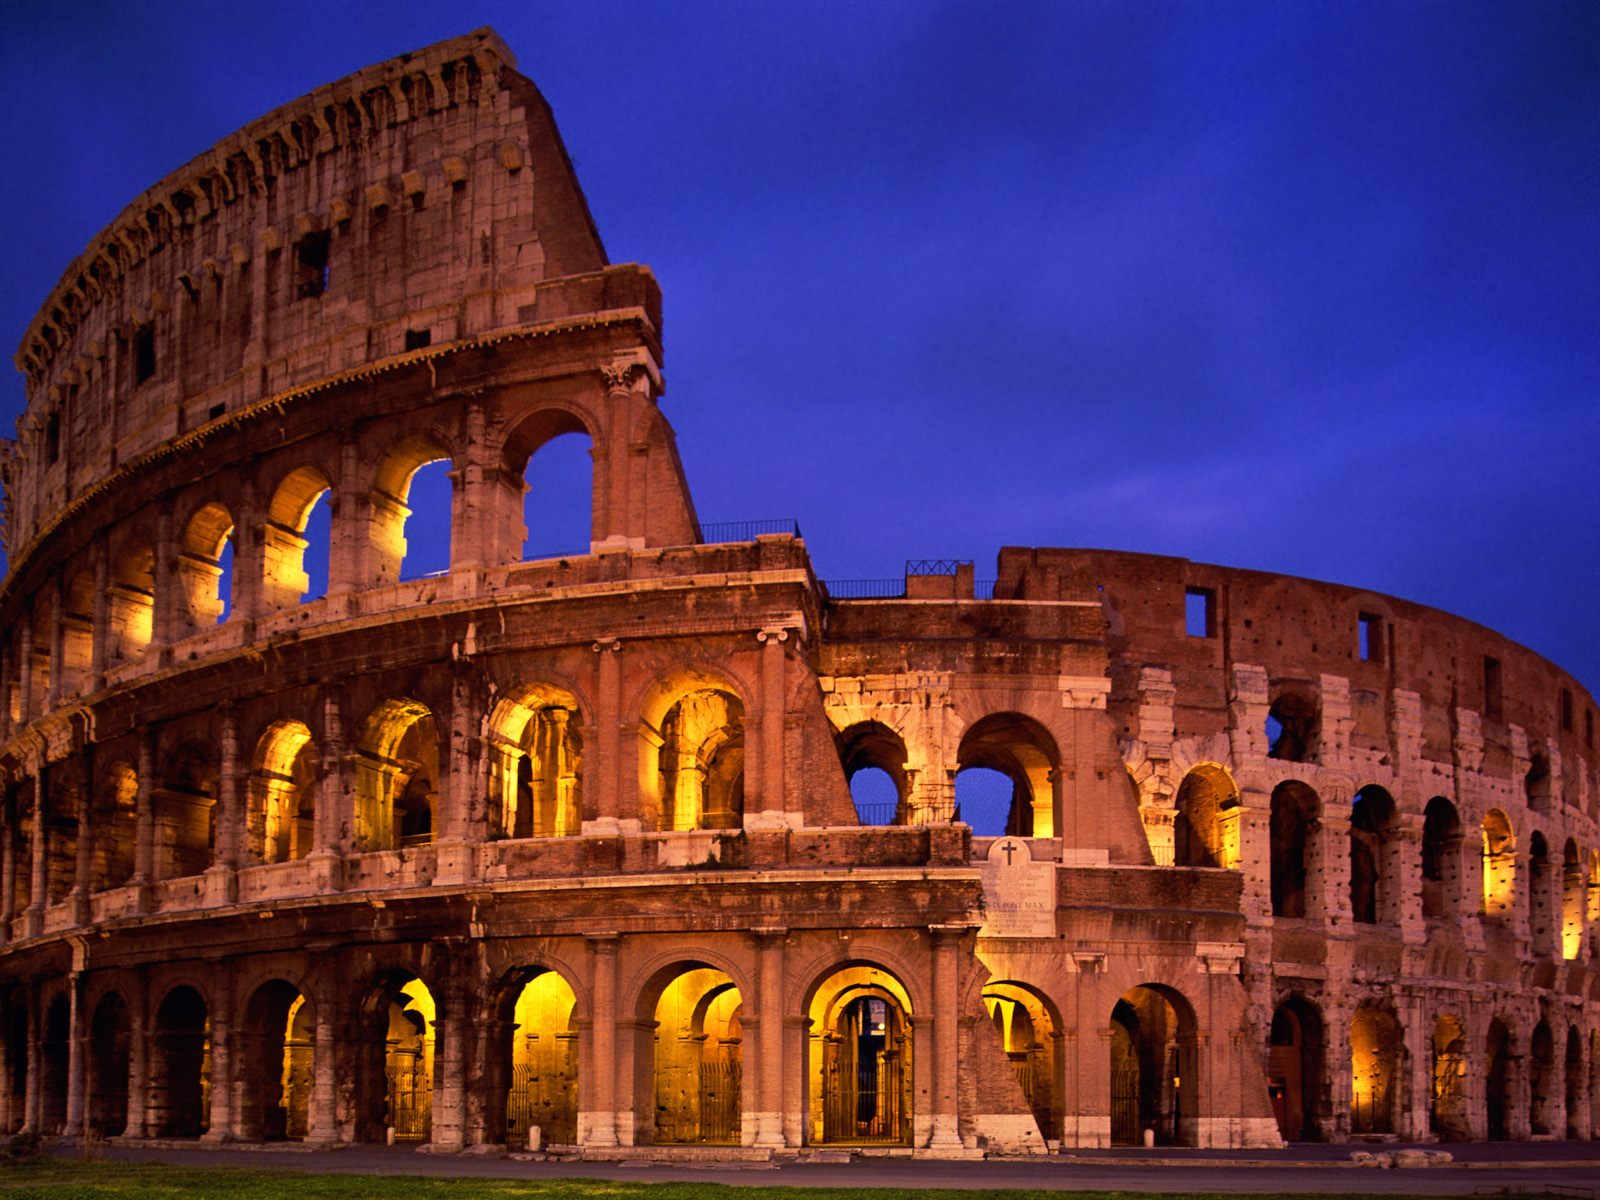 The Colosseum Rome Italy Wallpapers | HD Wallpapers | ID #5985